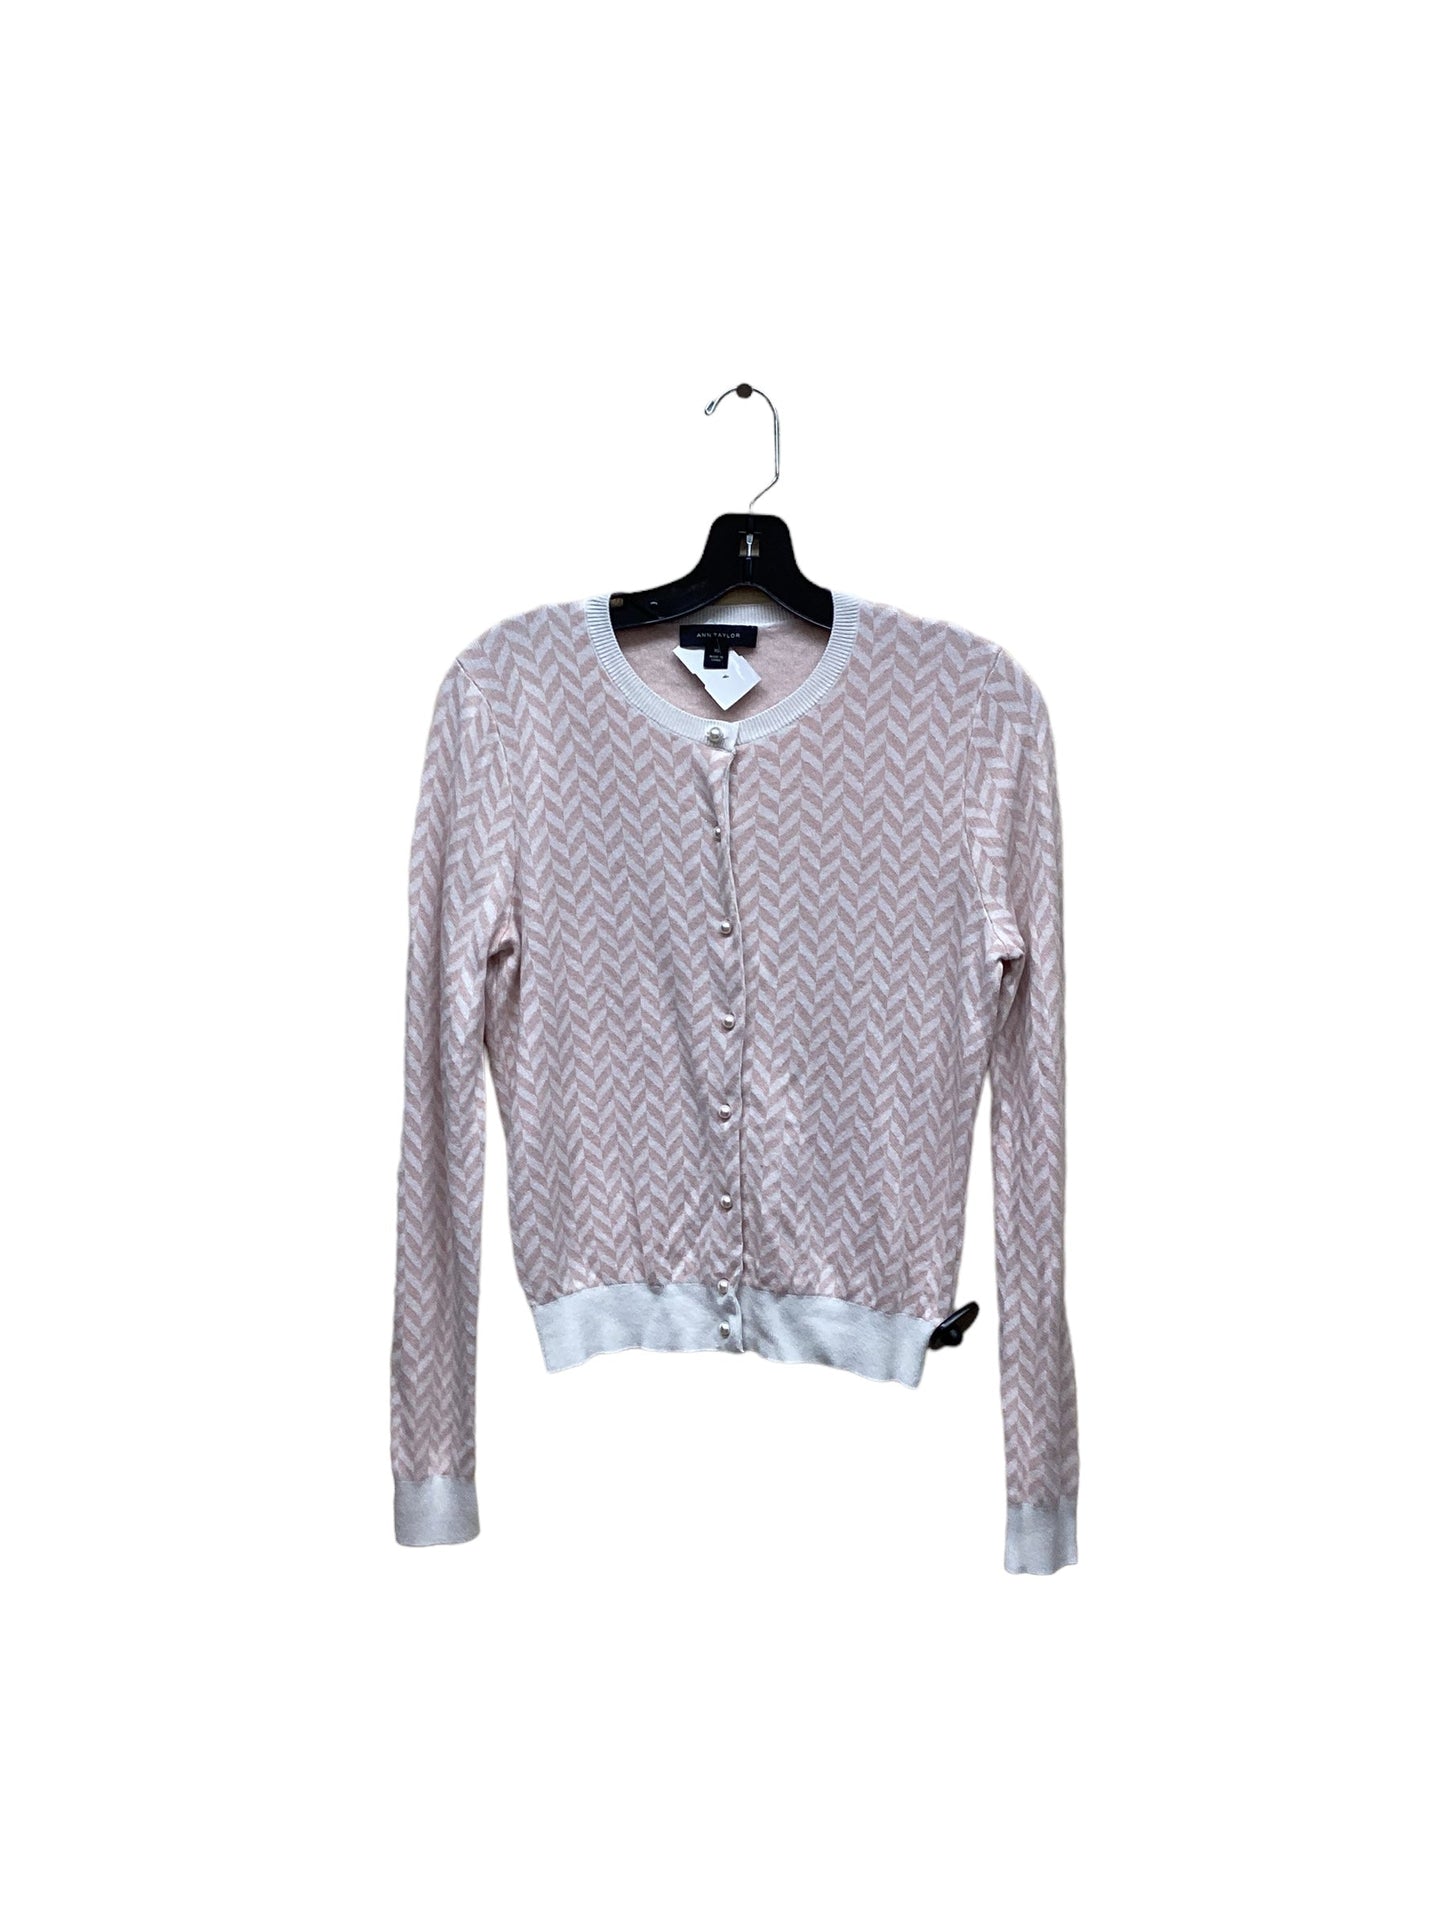 Sweater By Ann Taylor  Size: Xs